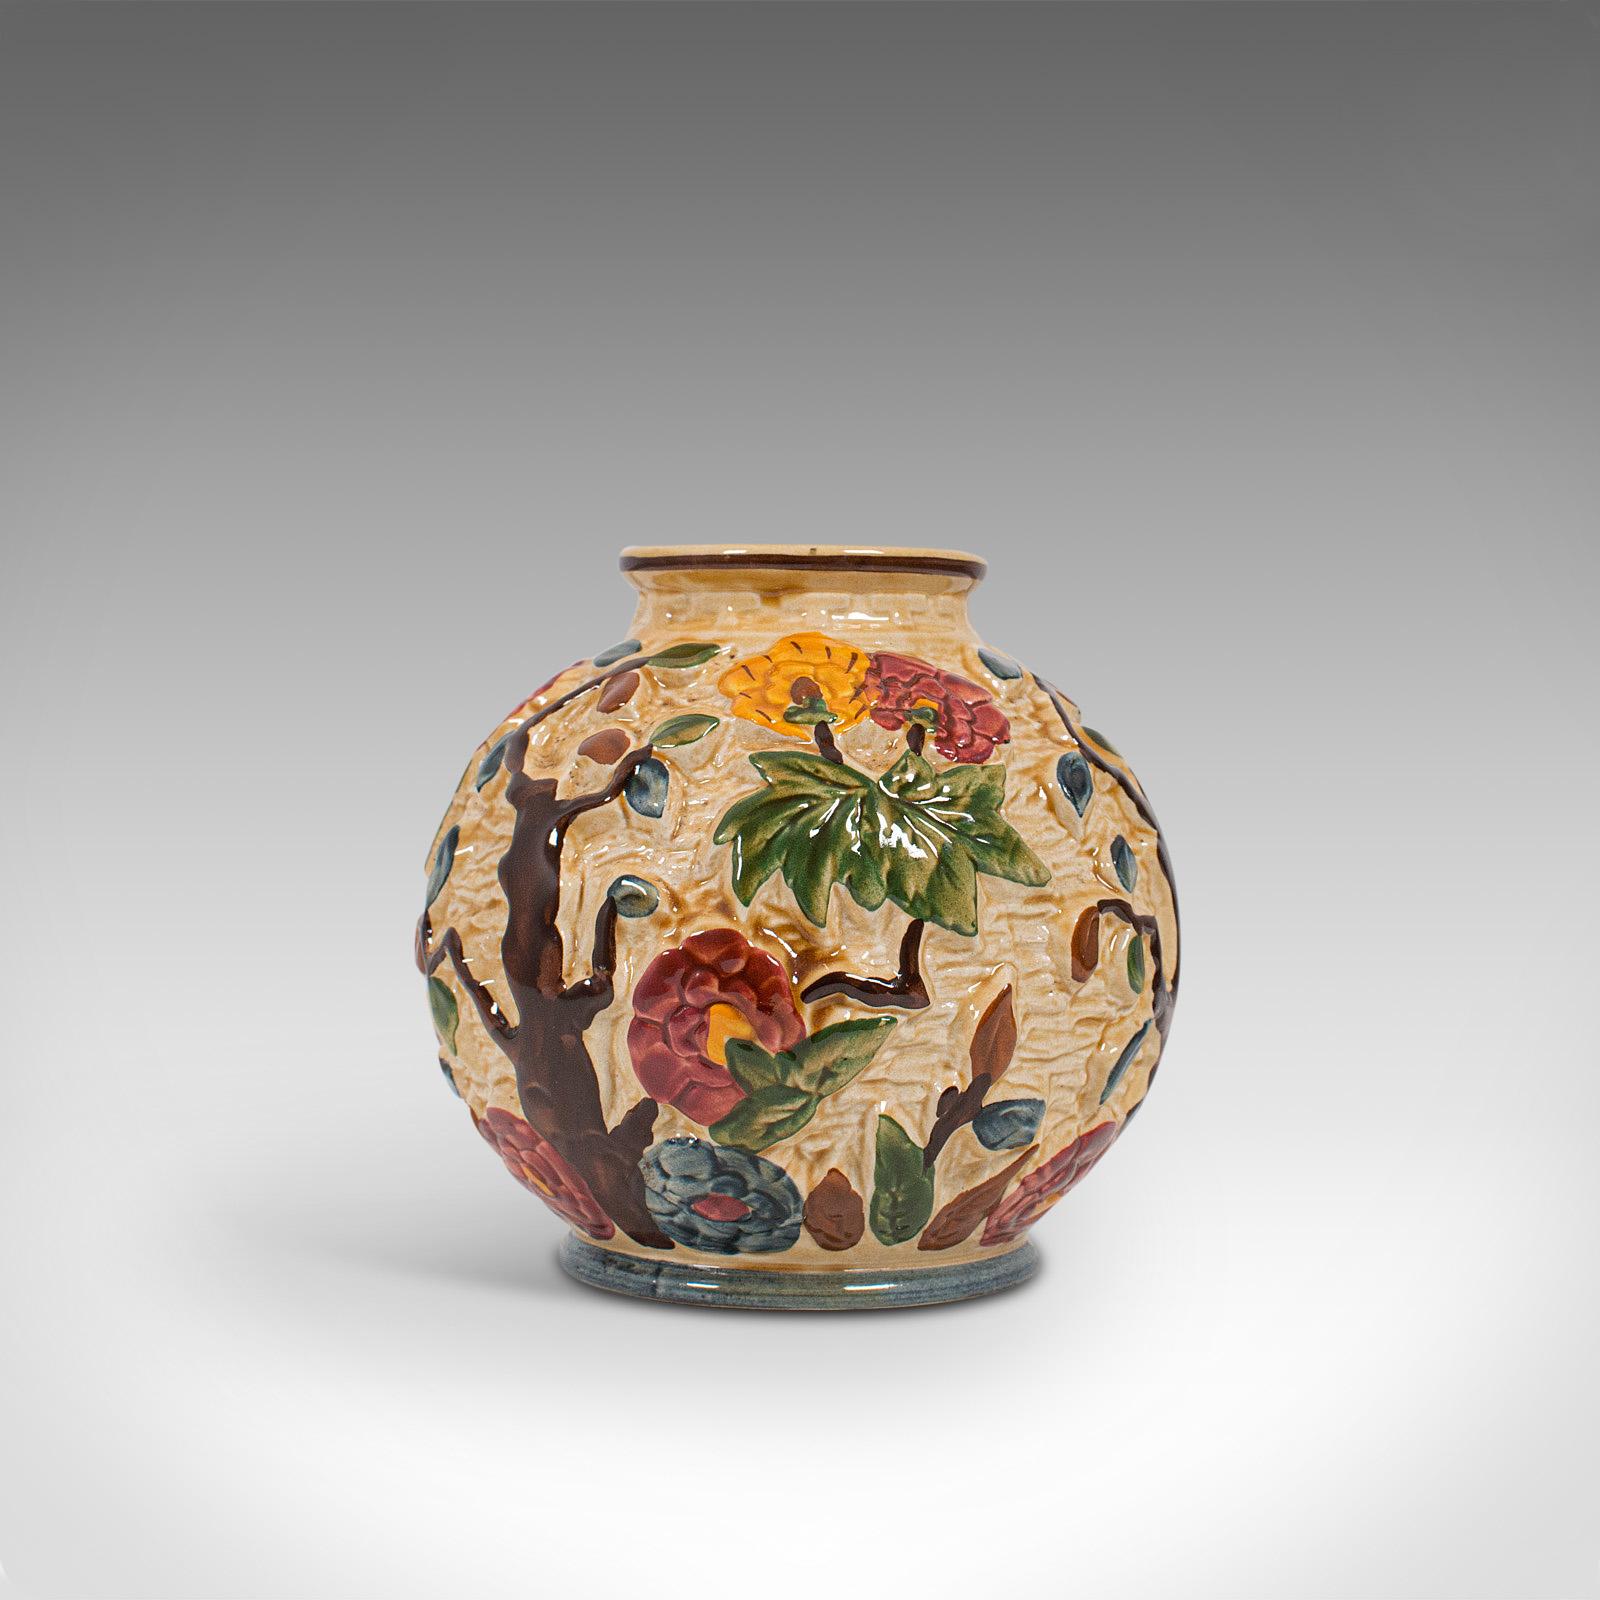 20th Century Small Vintage Decorative Vase, English, Ceramic, Baluster Urn, Indian Tree, 1950 For Sale